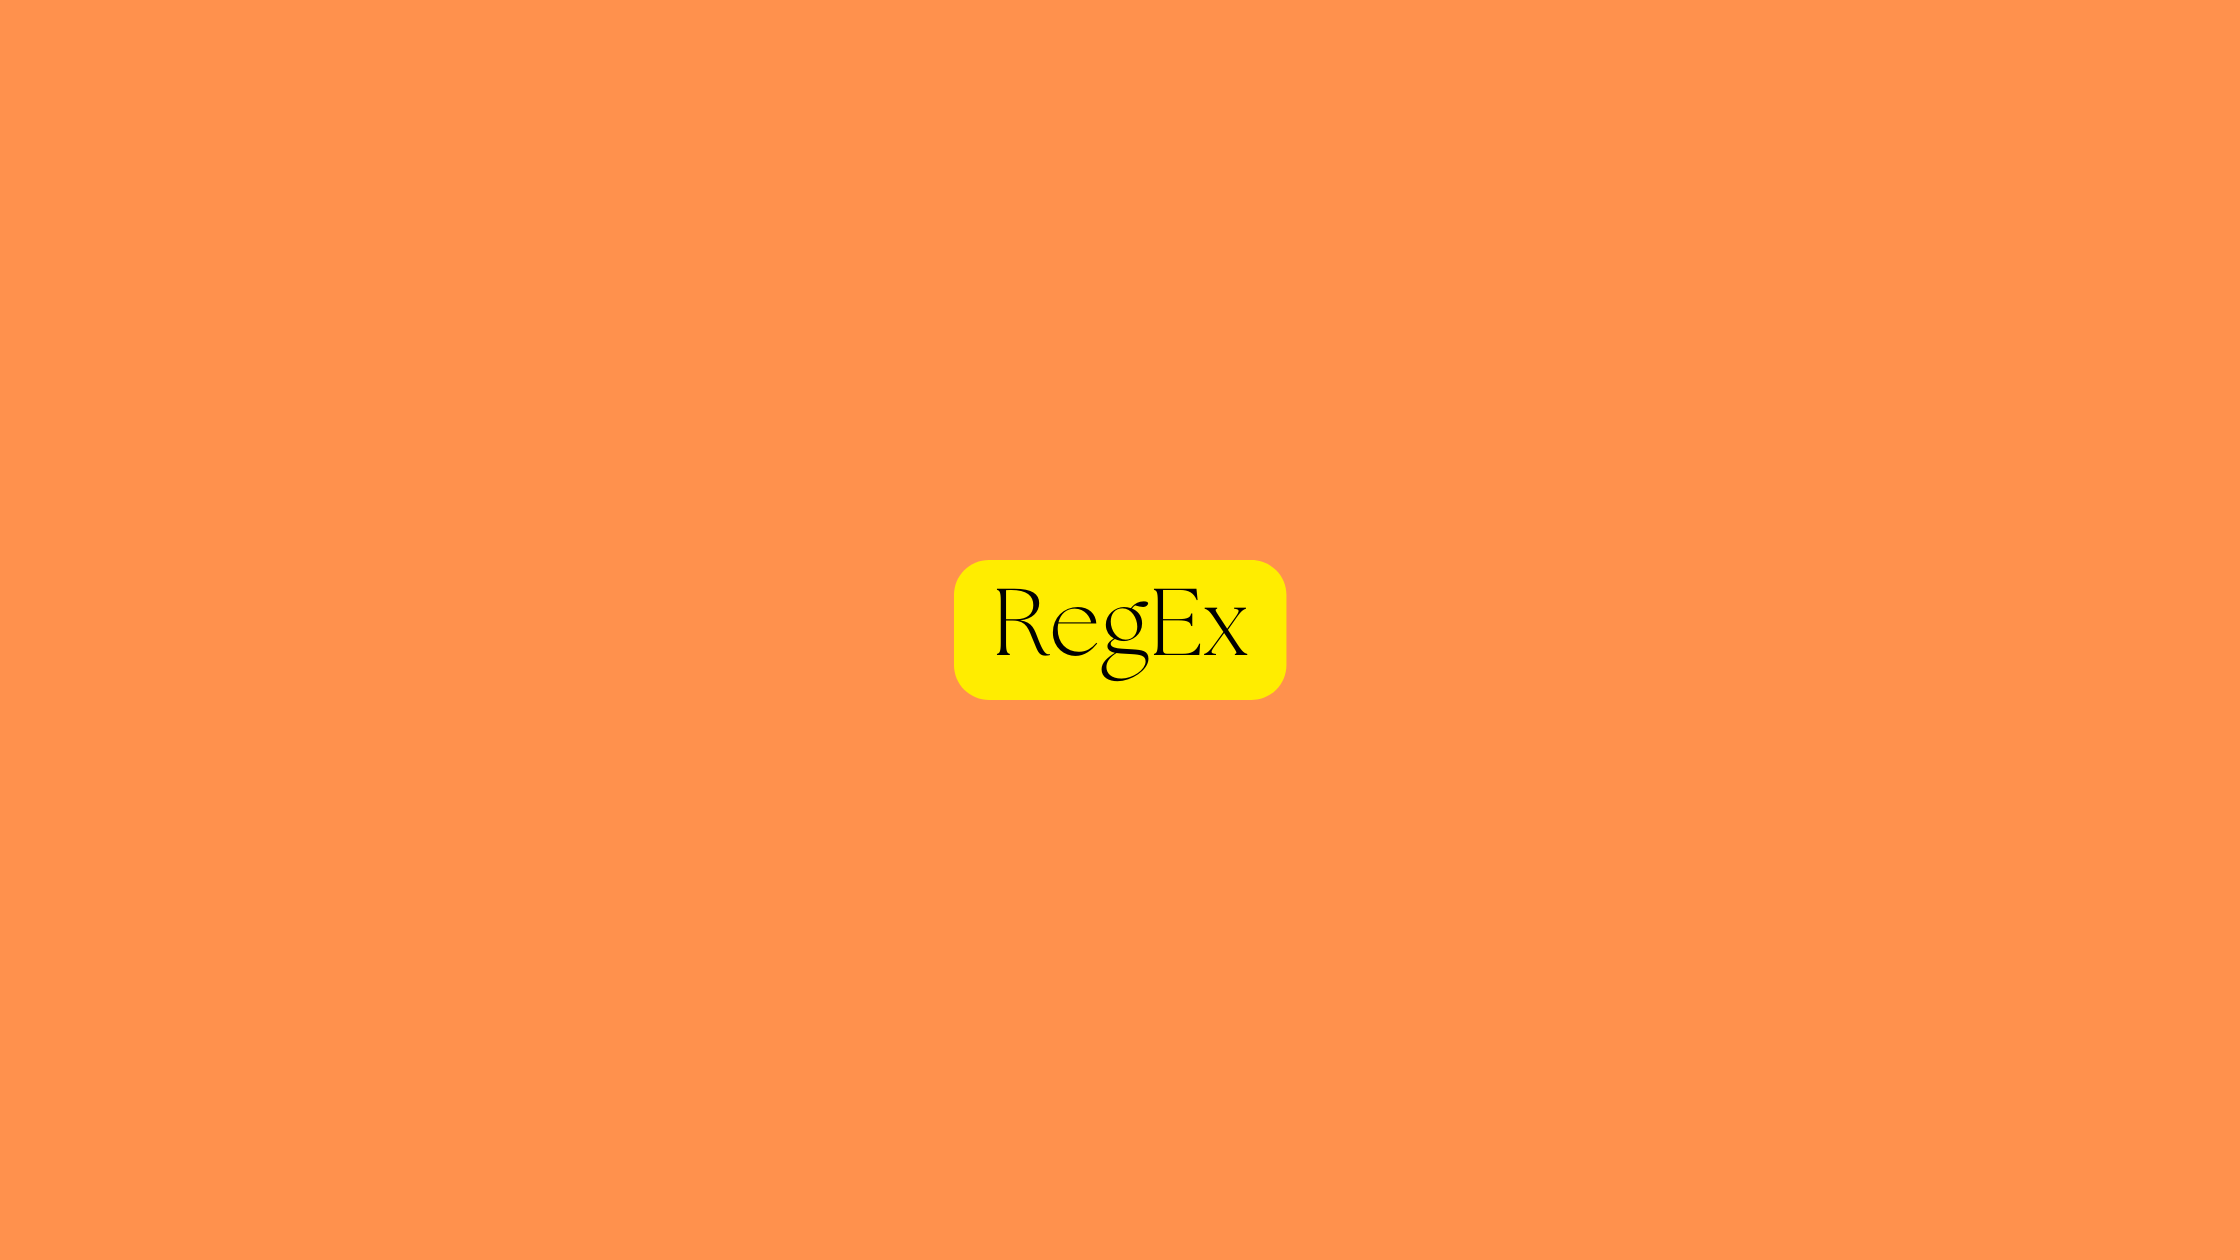 How To Validate Email Using regex In Javascript